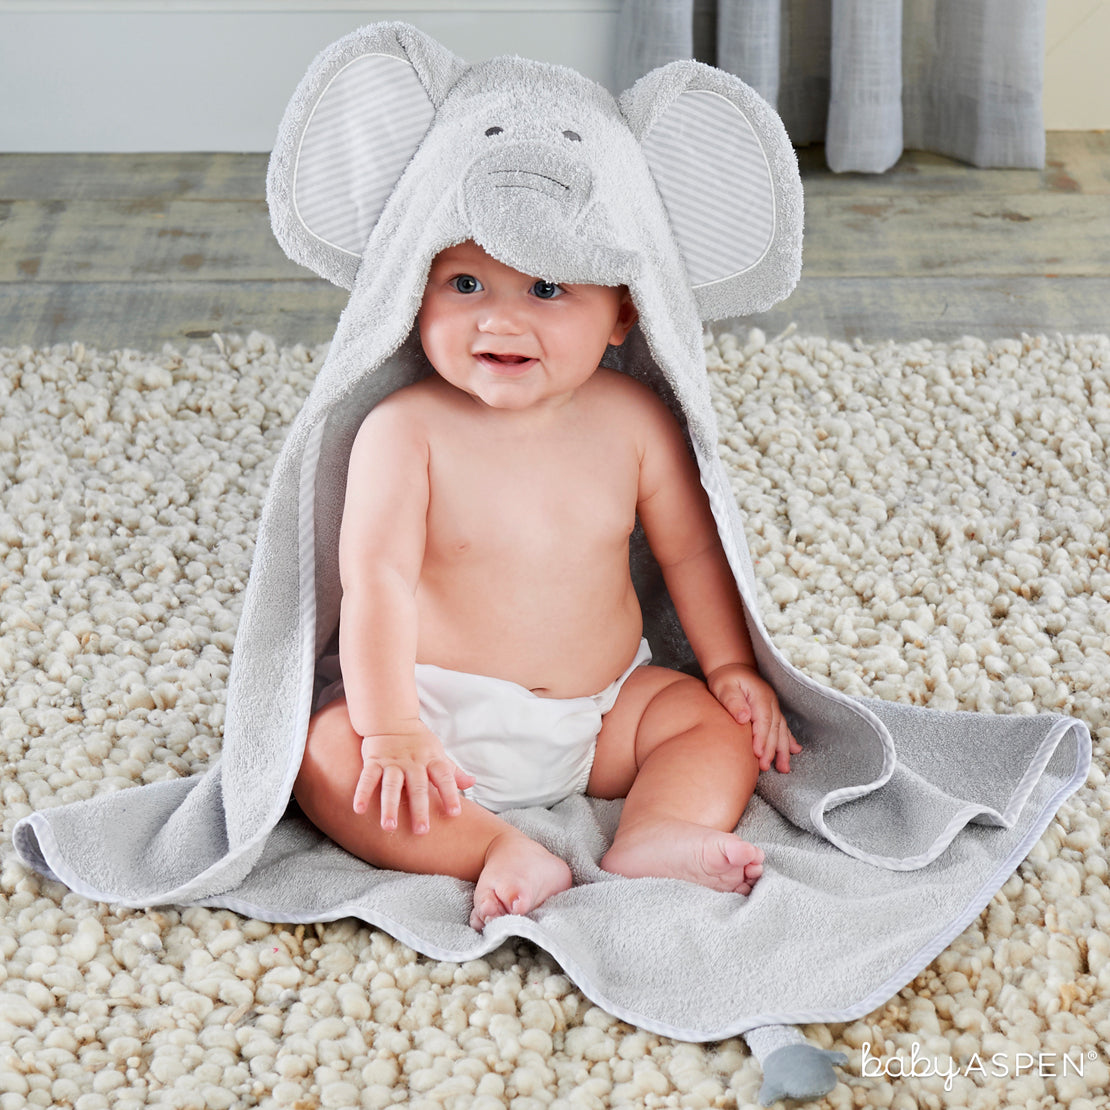 Elephant Hooded Towel | Sweet Elephant Themed Gifts For Your Little Peanut | Baby Aspen